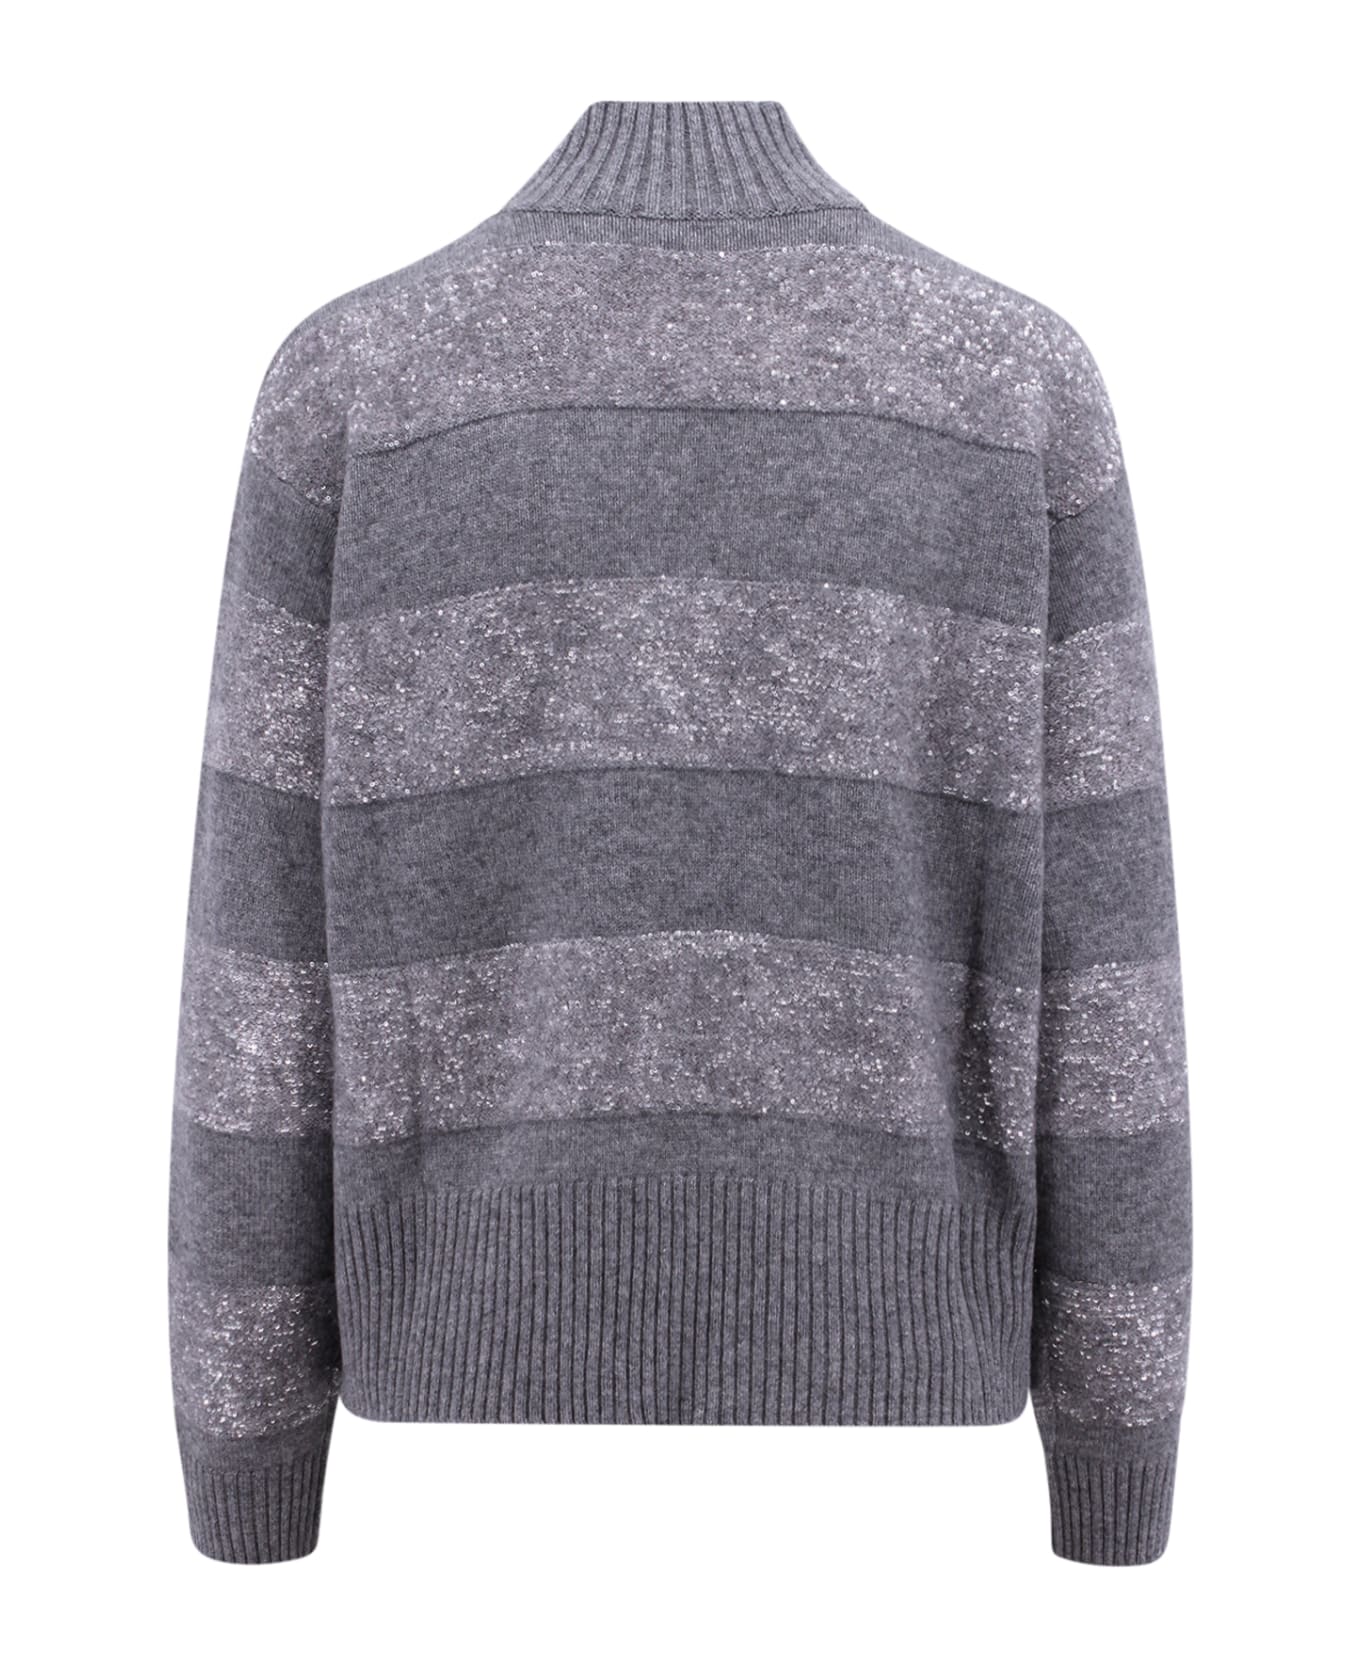 Brunello Cucinelli Long-sleeved Turtleneck Sweater In Fine Wool, Cashmere And Silk With Striped Pattern With Exclusive Micro Sequin Details - Grey